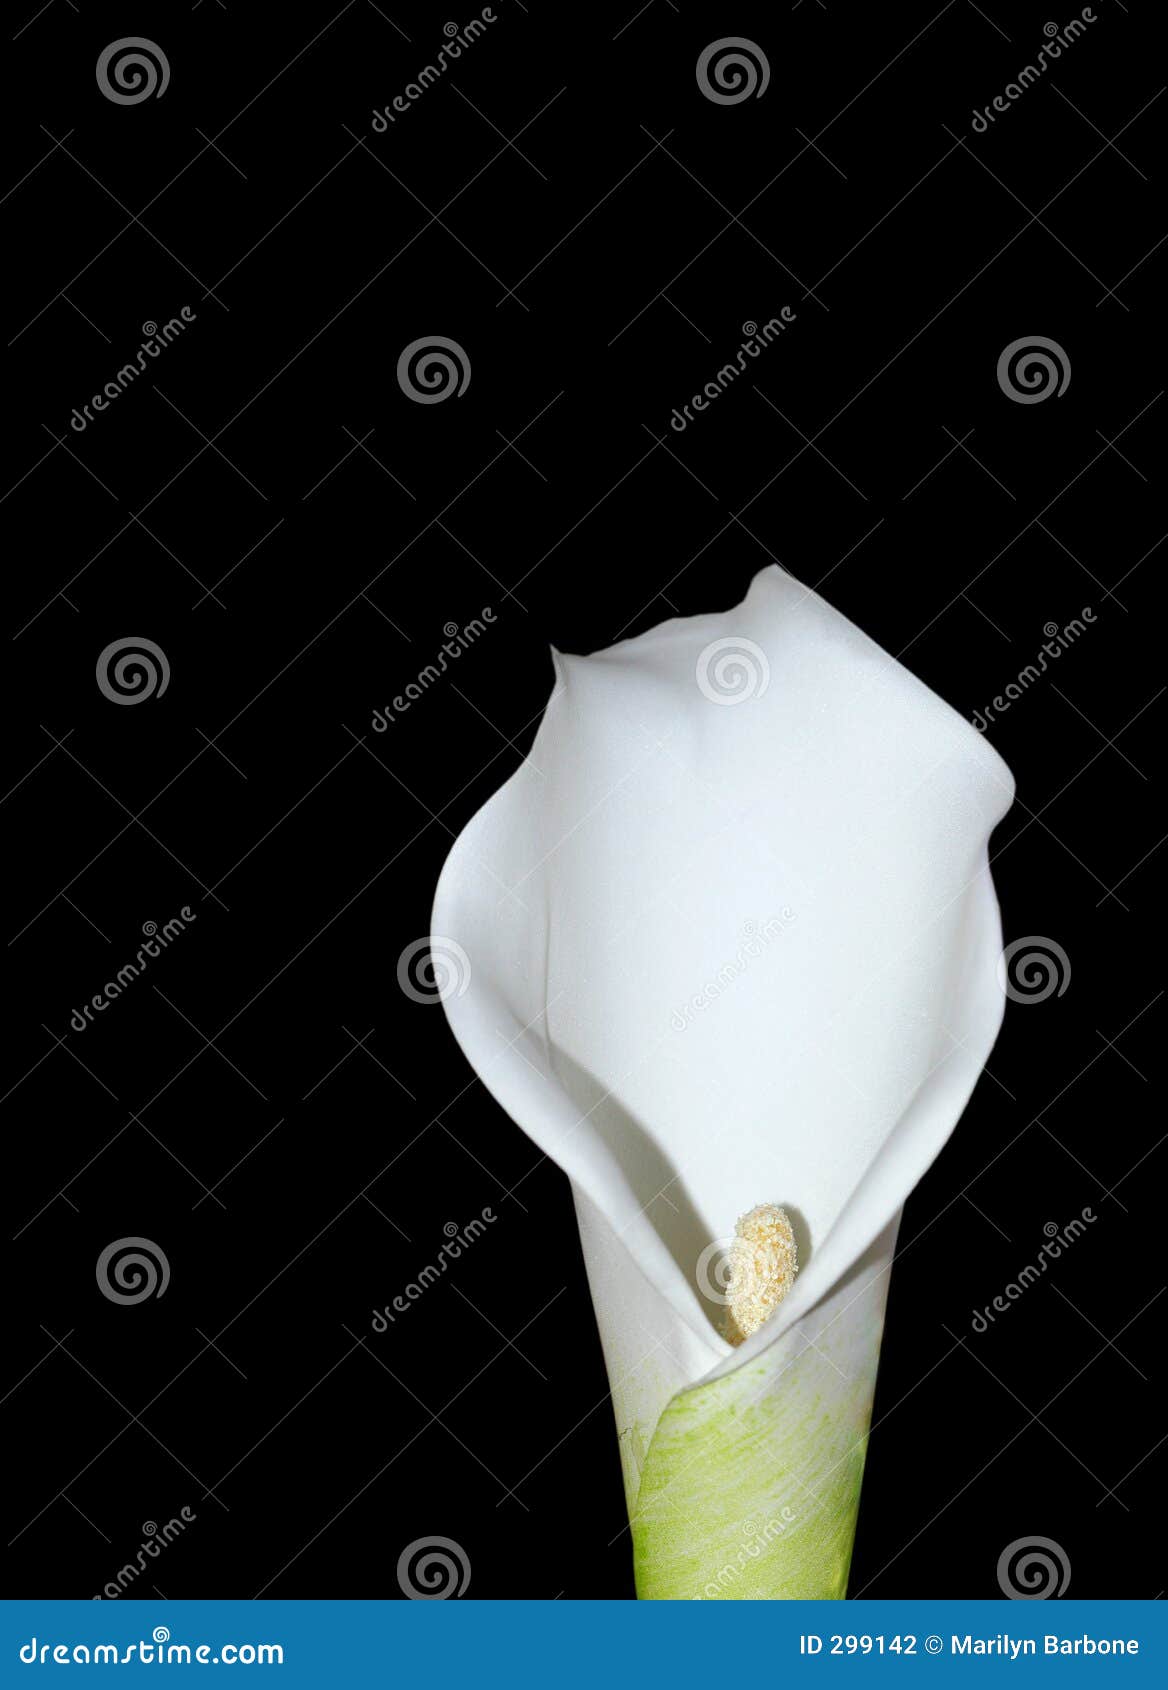 the arum lily